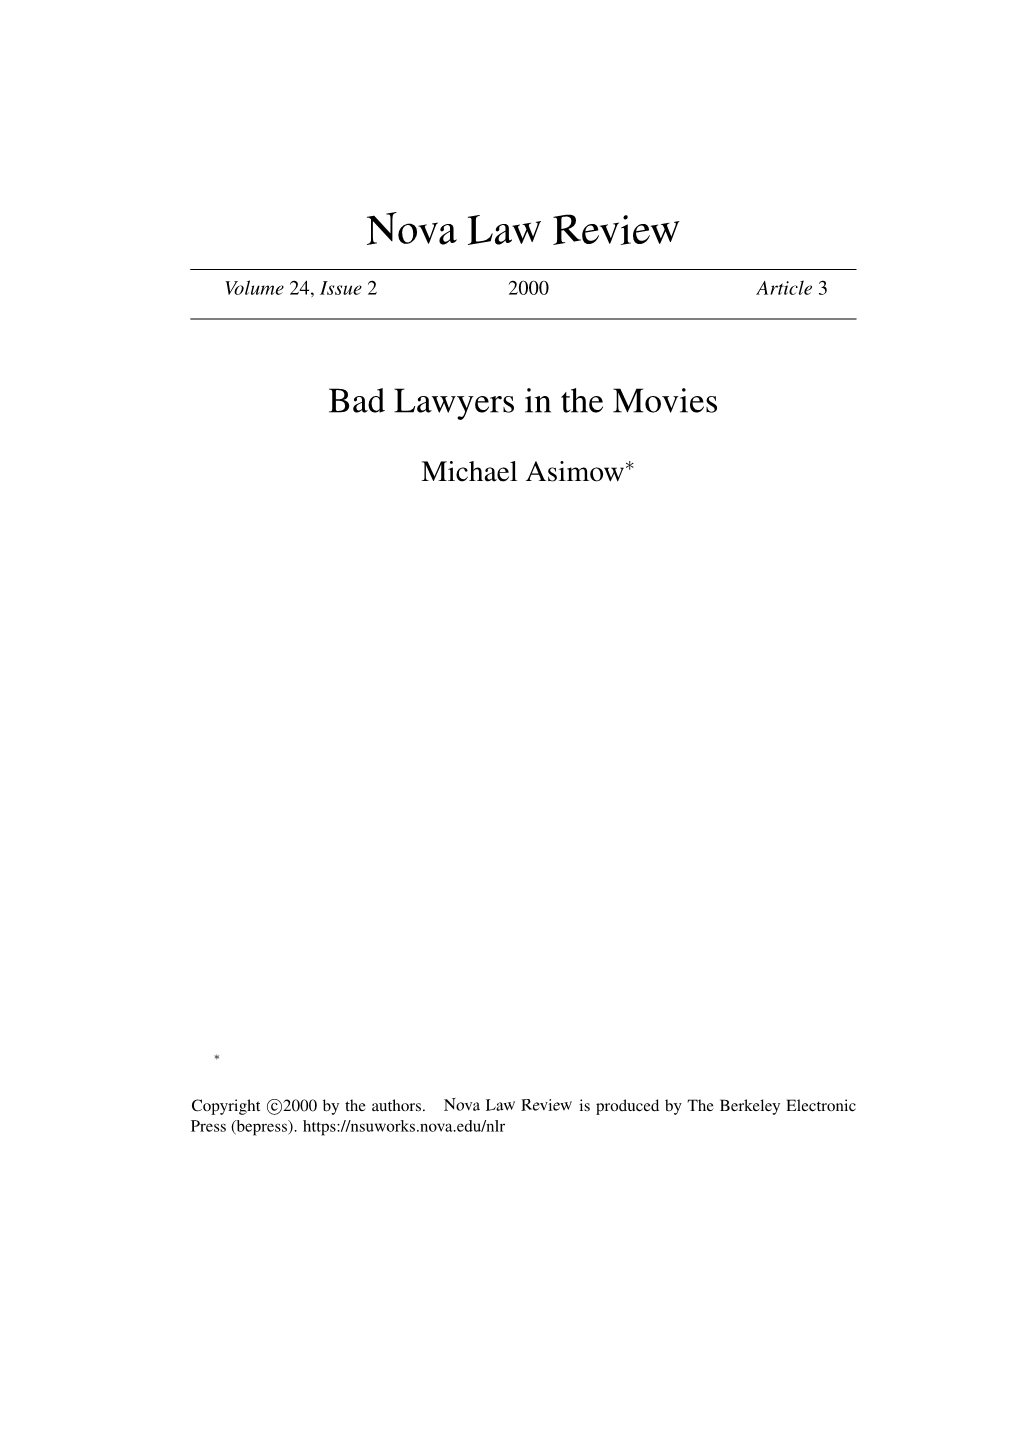 Bad Lawyers in the Movies